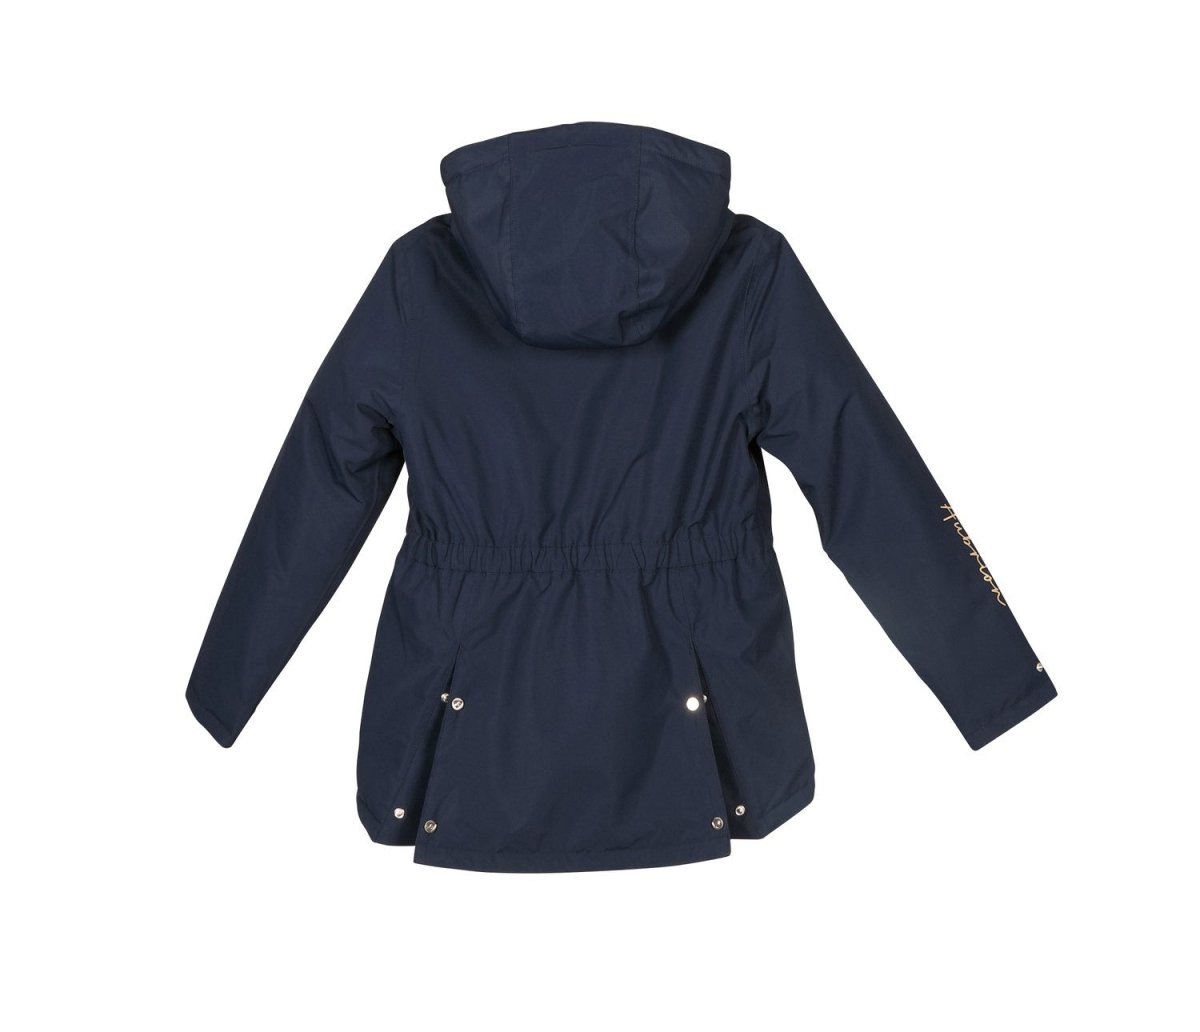 Aubrion Team Waterproof Coat - Young Rider - Navy - 11/12 Yrs